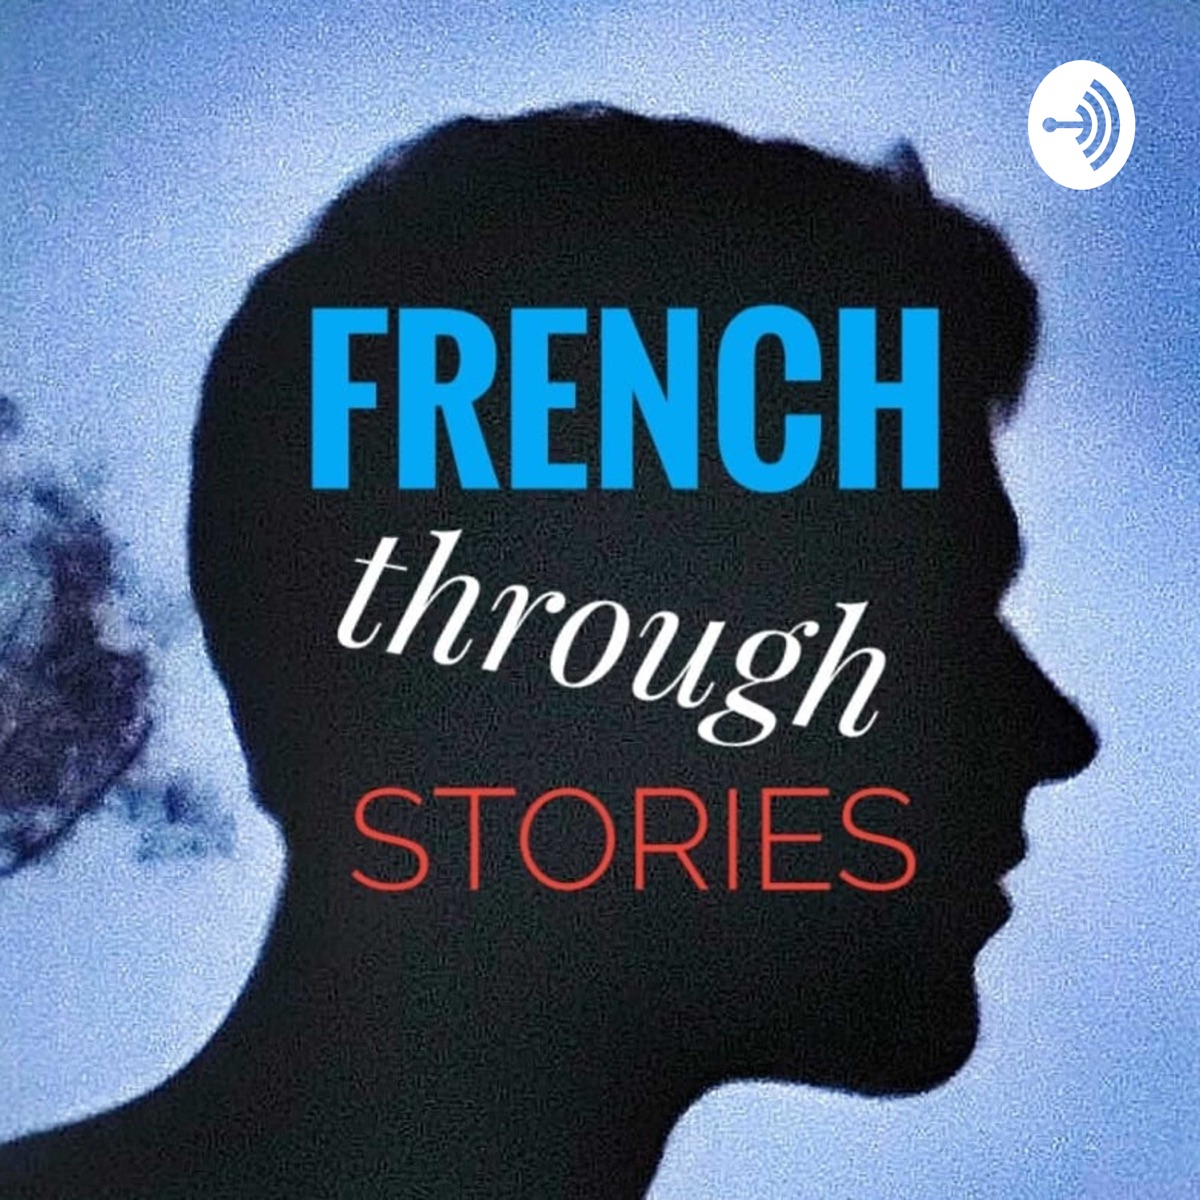 French Through Stories Podcast Podtail